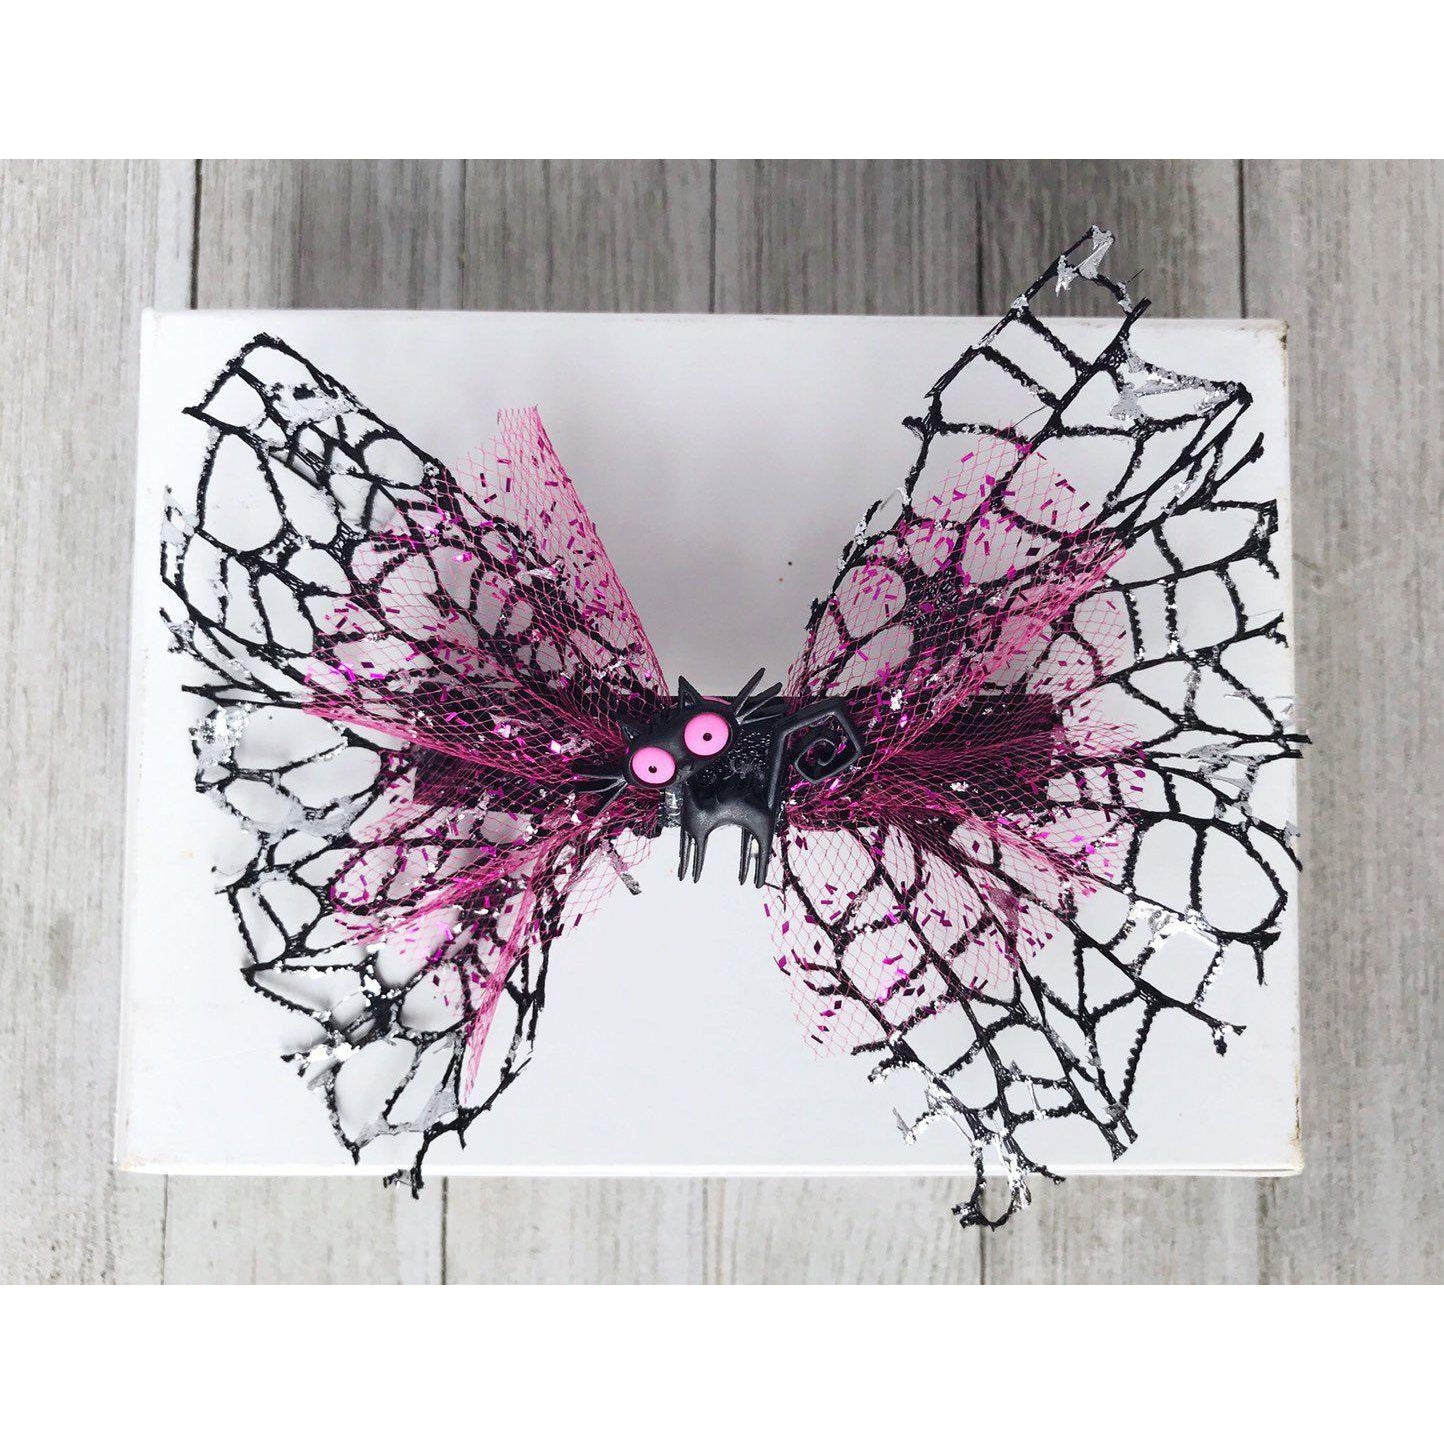 Halloween Black Spooky Cat Pink Hair Bow - Fun & Festive Halloween Accessory with a Pop of Color